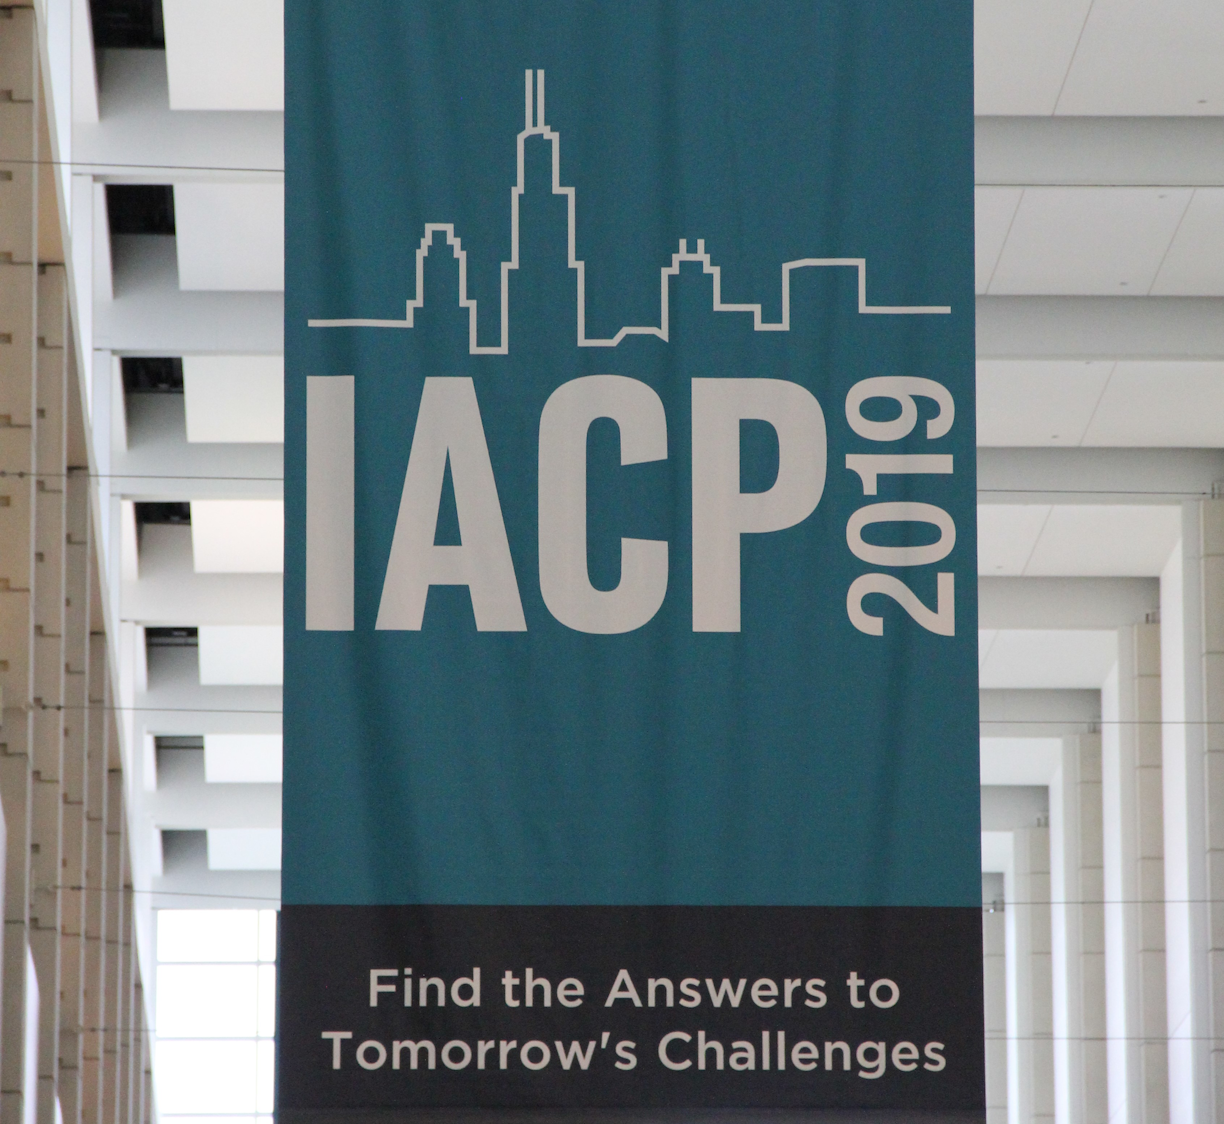 IACP 2019 Three Trends From the Floor Officer